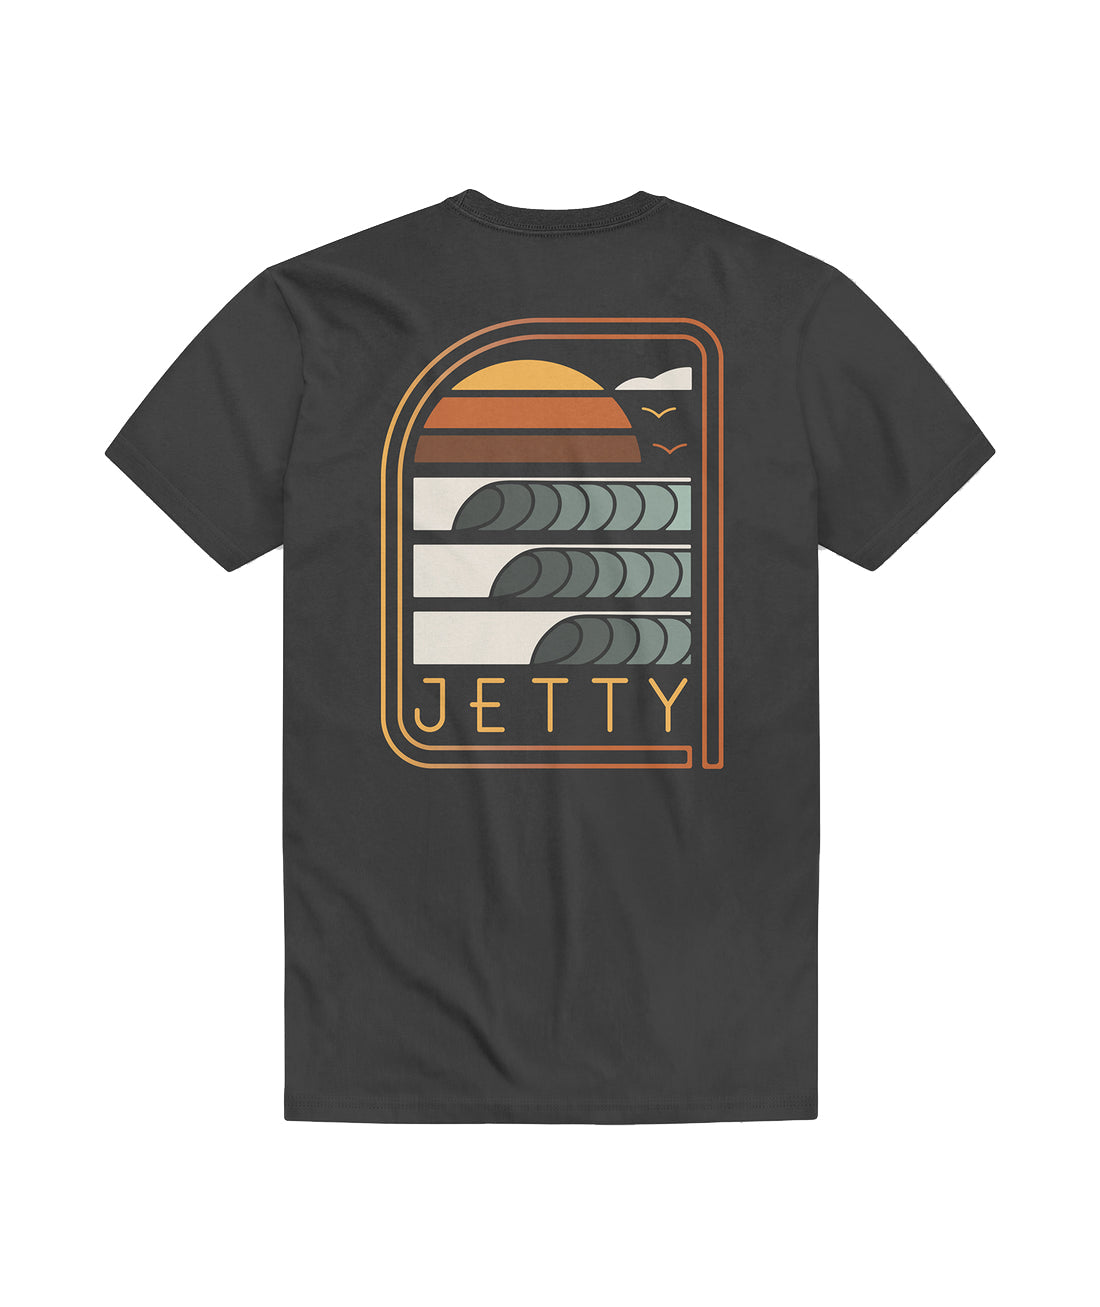 Jetty Sunup SS Tee Charcoal XL